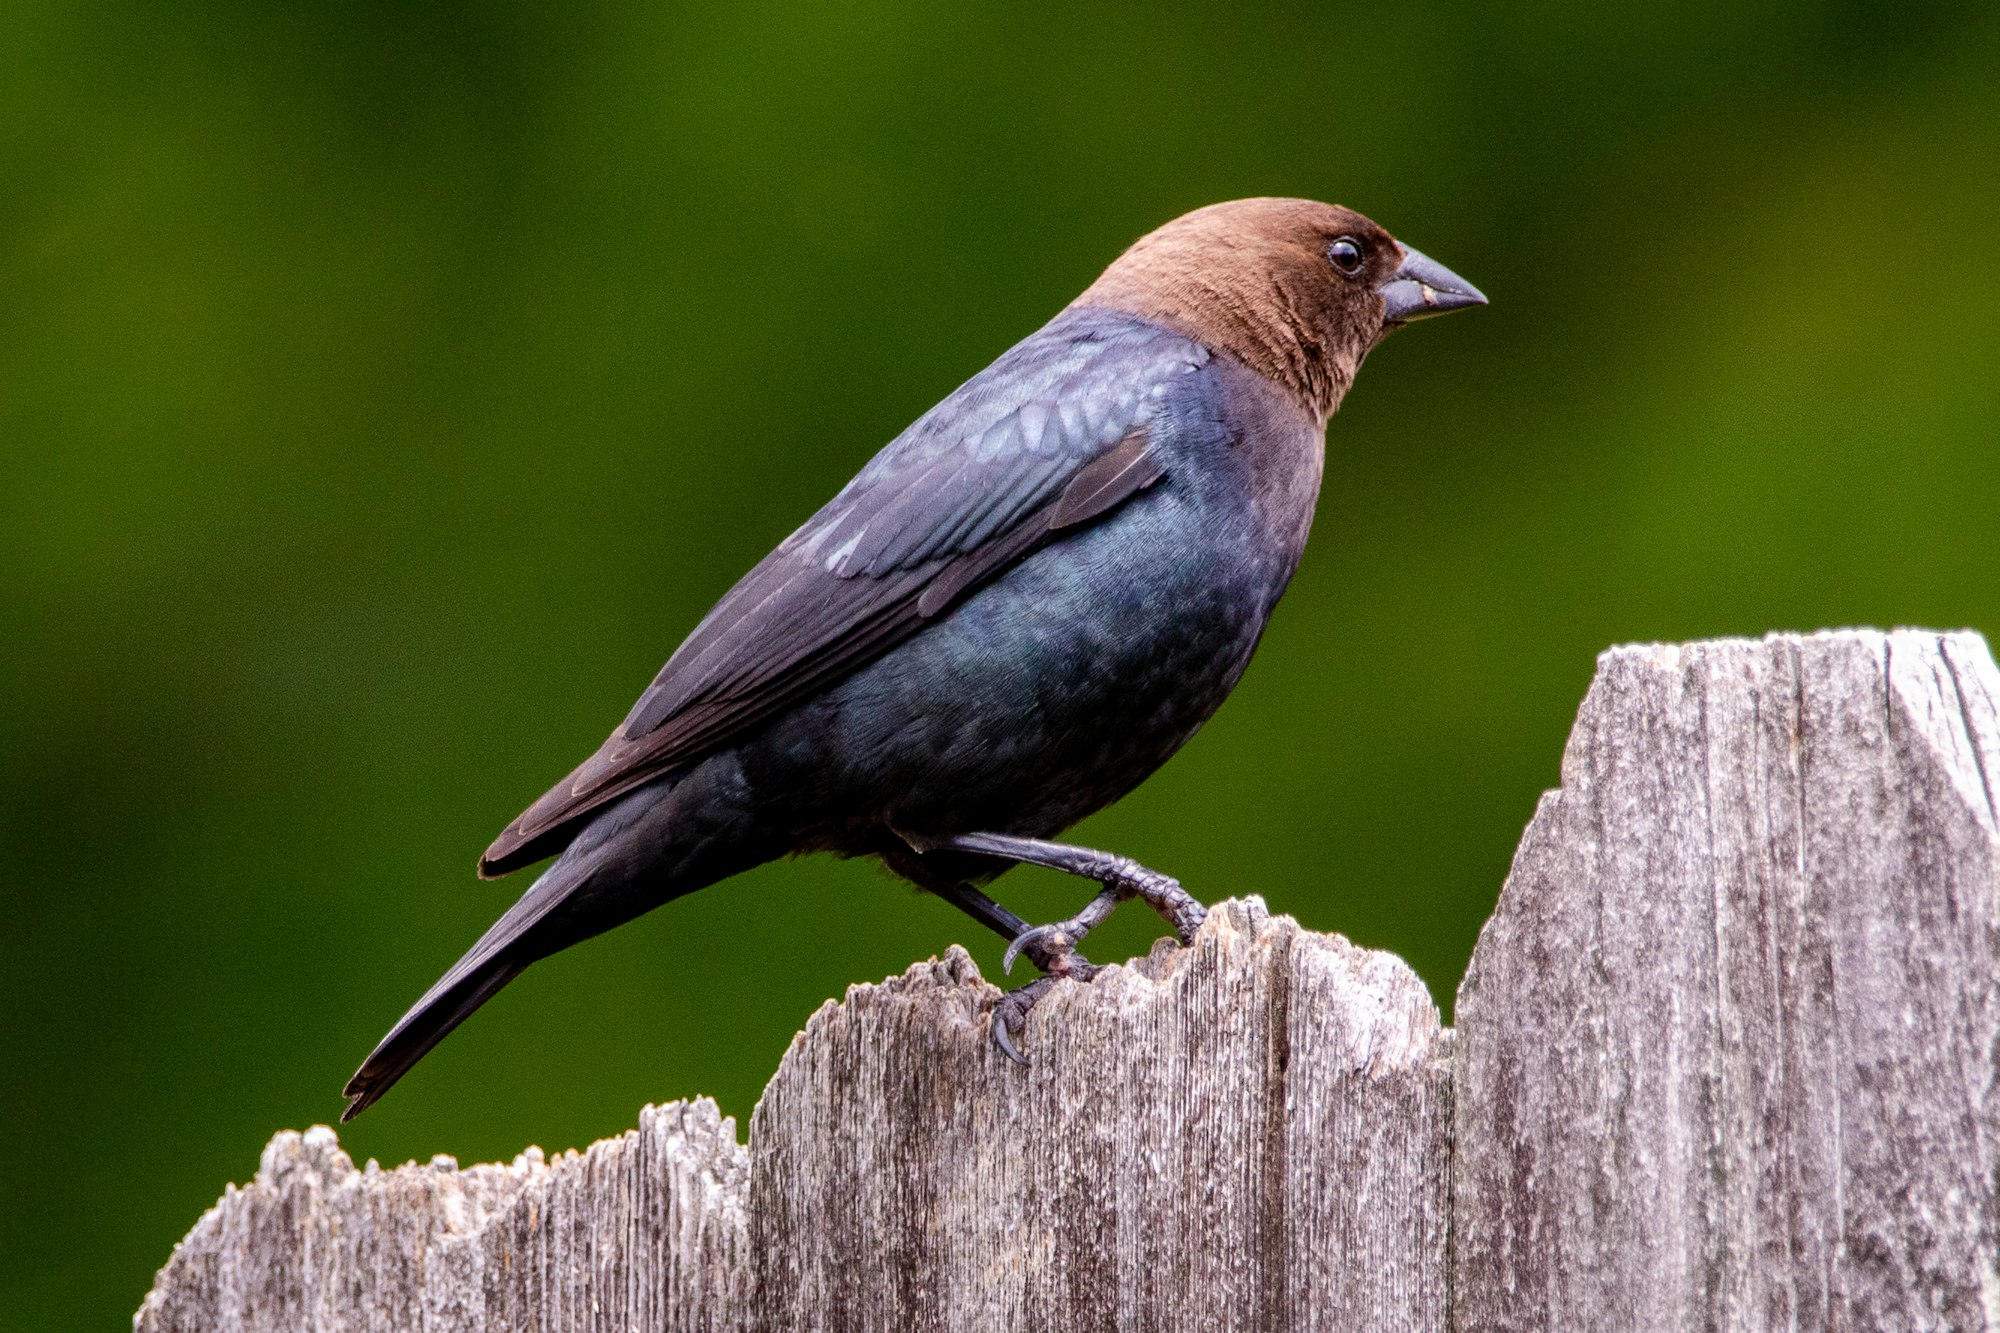 A brown-headed cowbird perched on the fence, ready to parasitise other birds